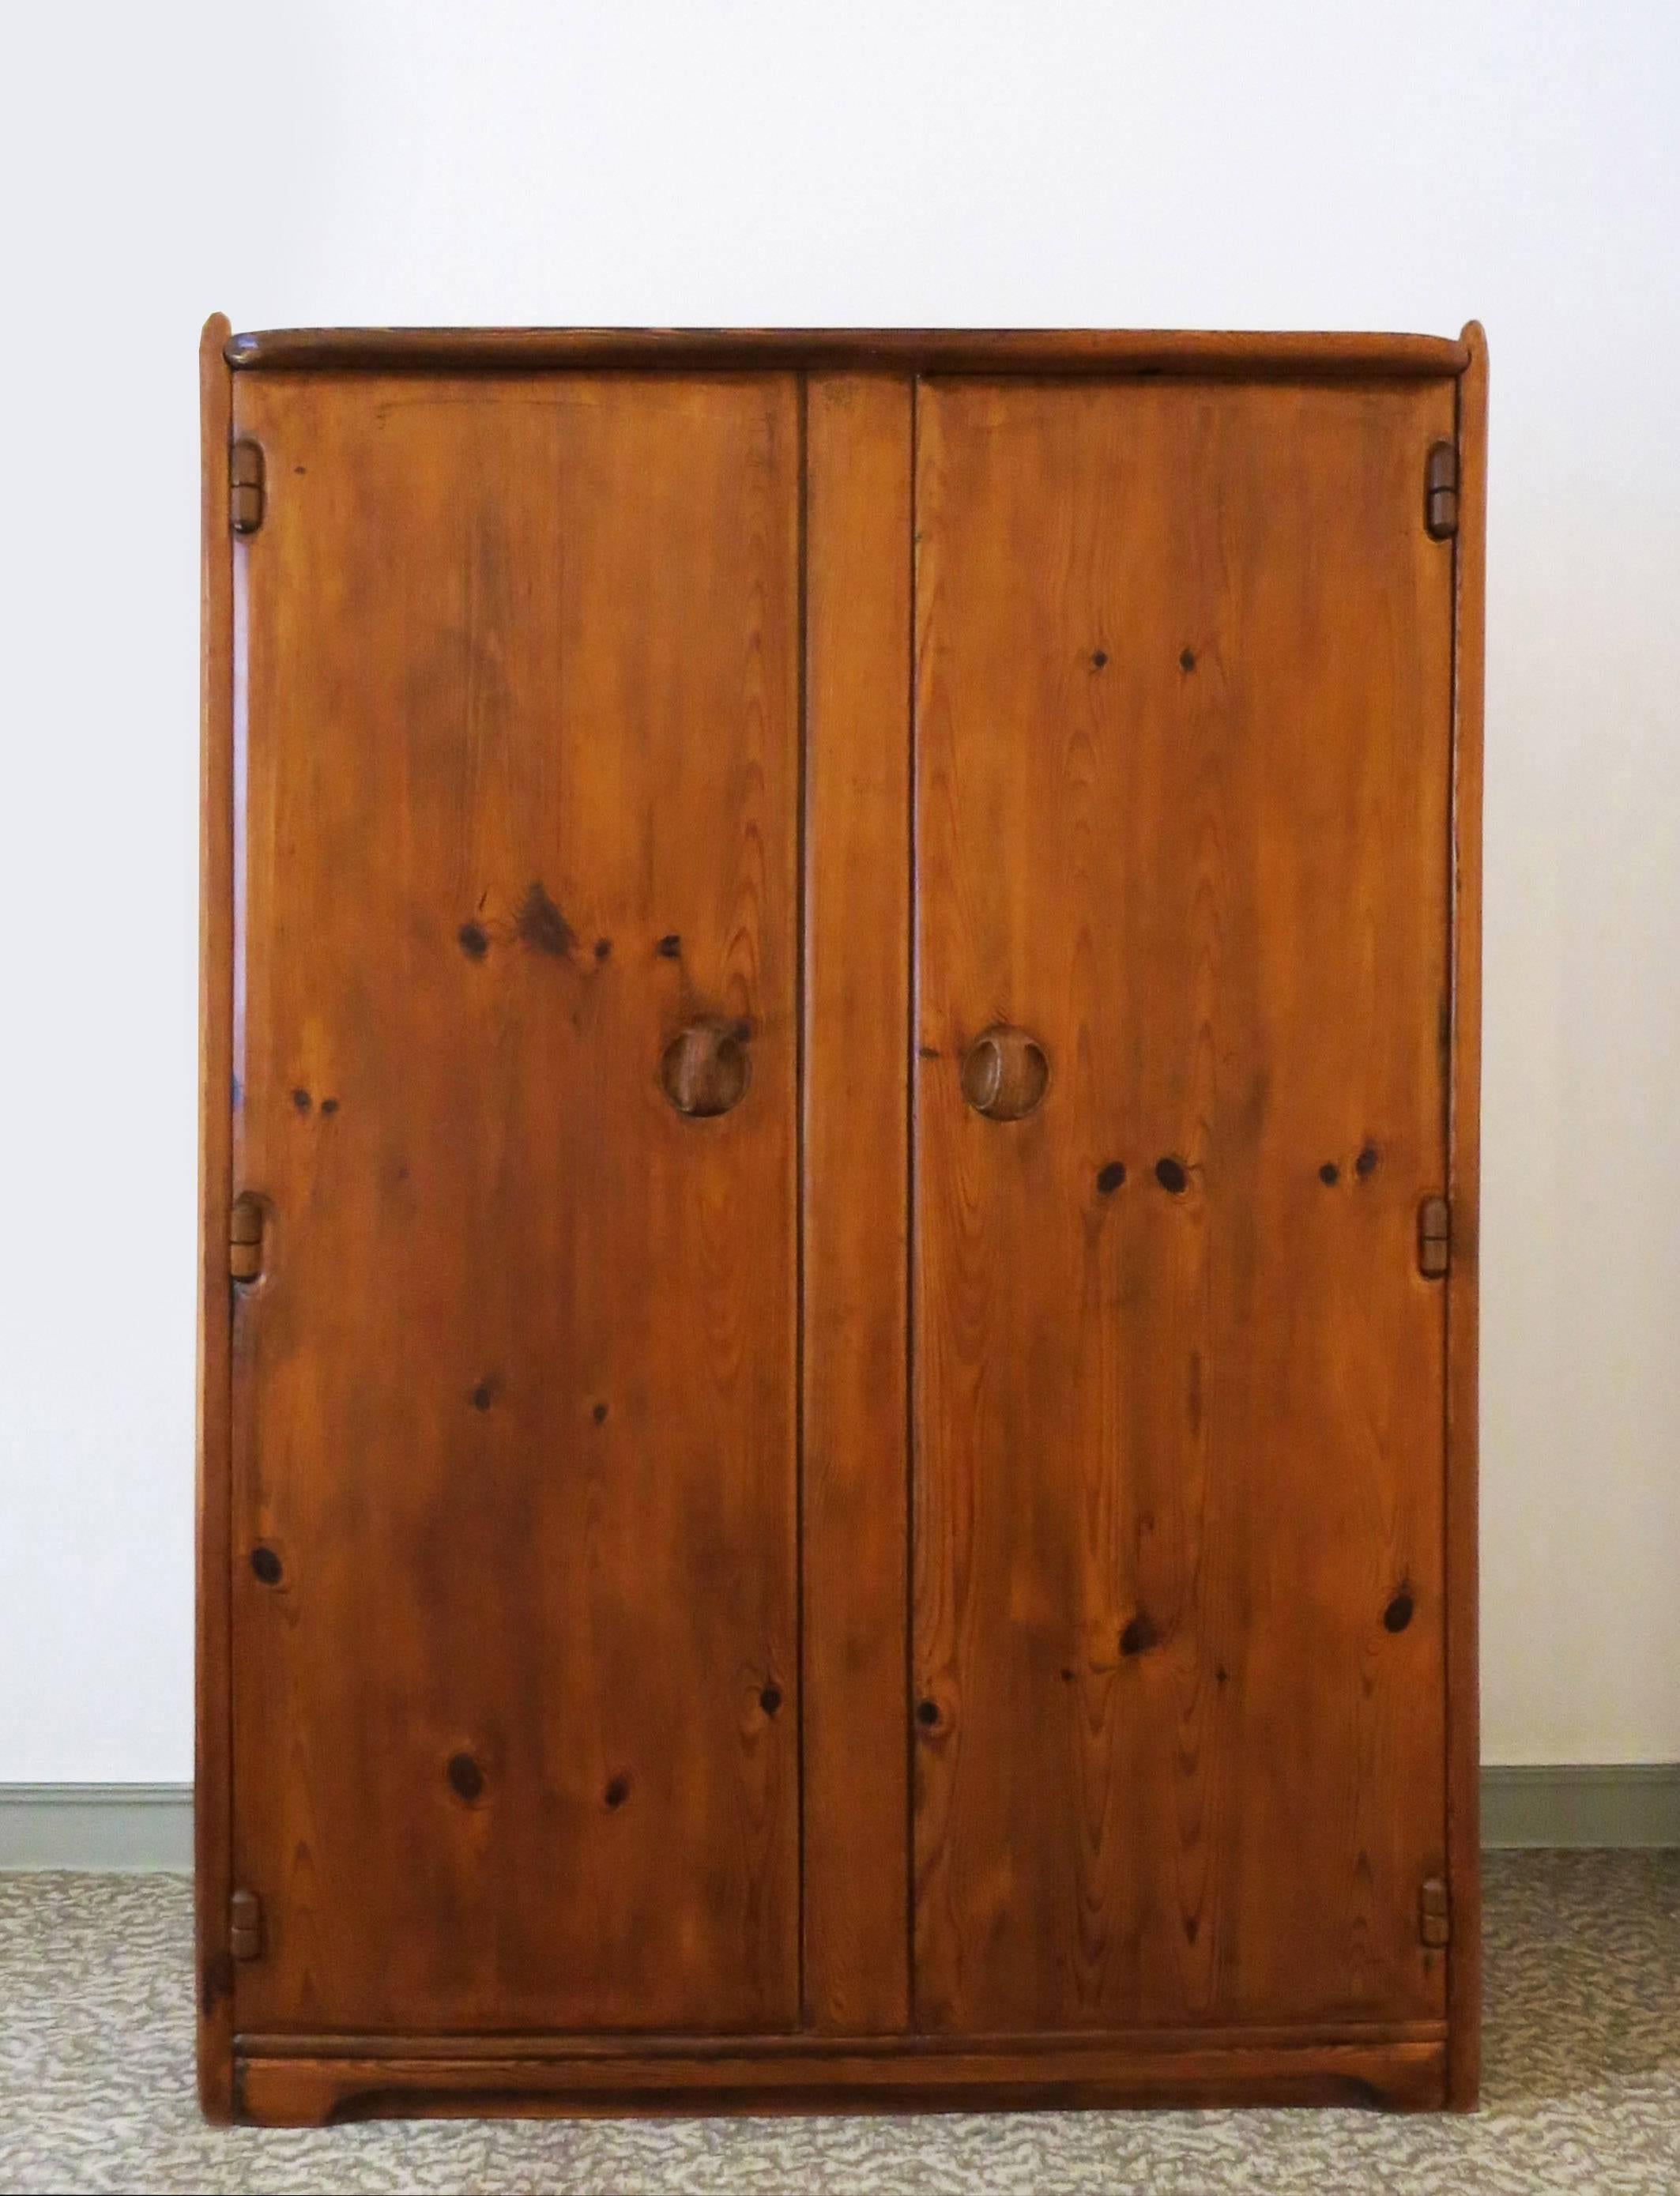 A beautiful wardrobe by Swiss cabinet-maker Franz Xaver Sproll in the 1940s.
Handmade by Sproll, with rounded carved edges. Handles, hinges and locks are also made in wood.
Interior shelves and hangers rod.